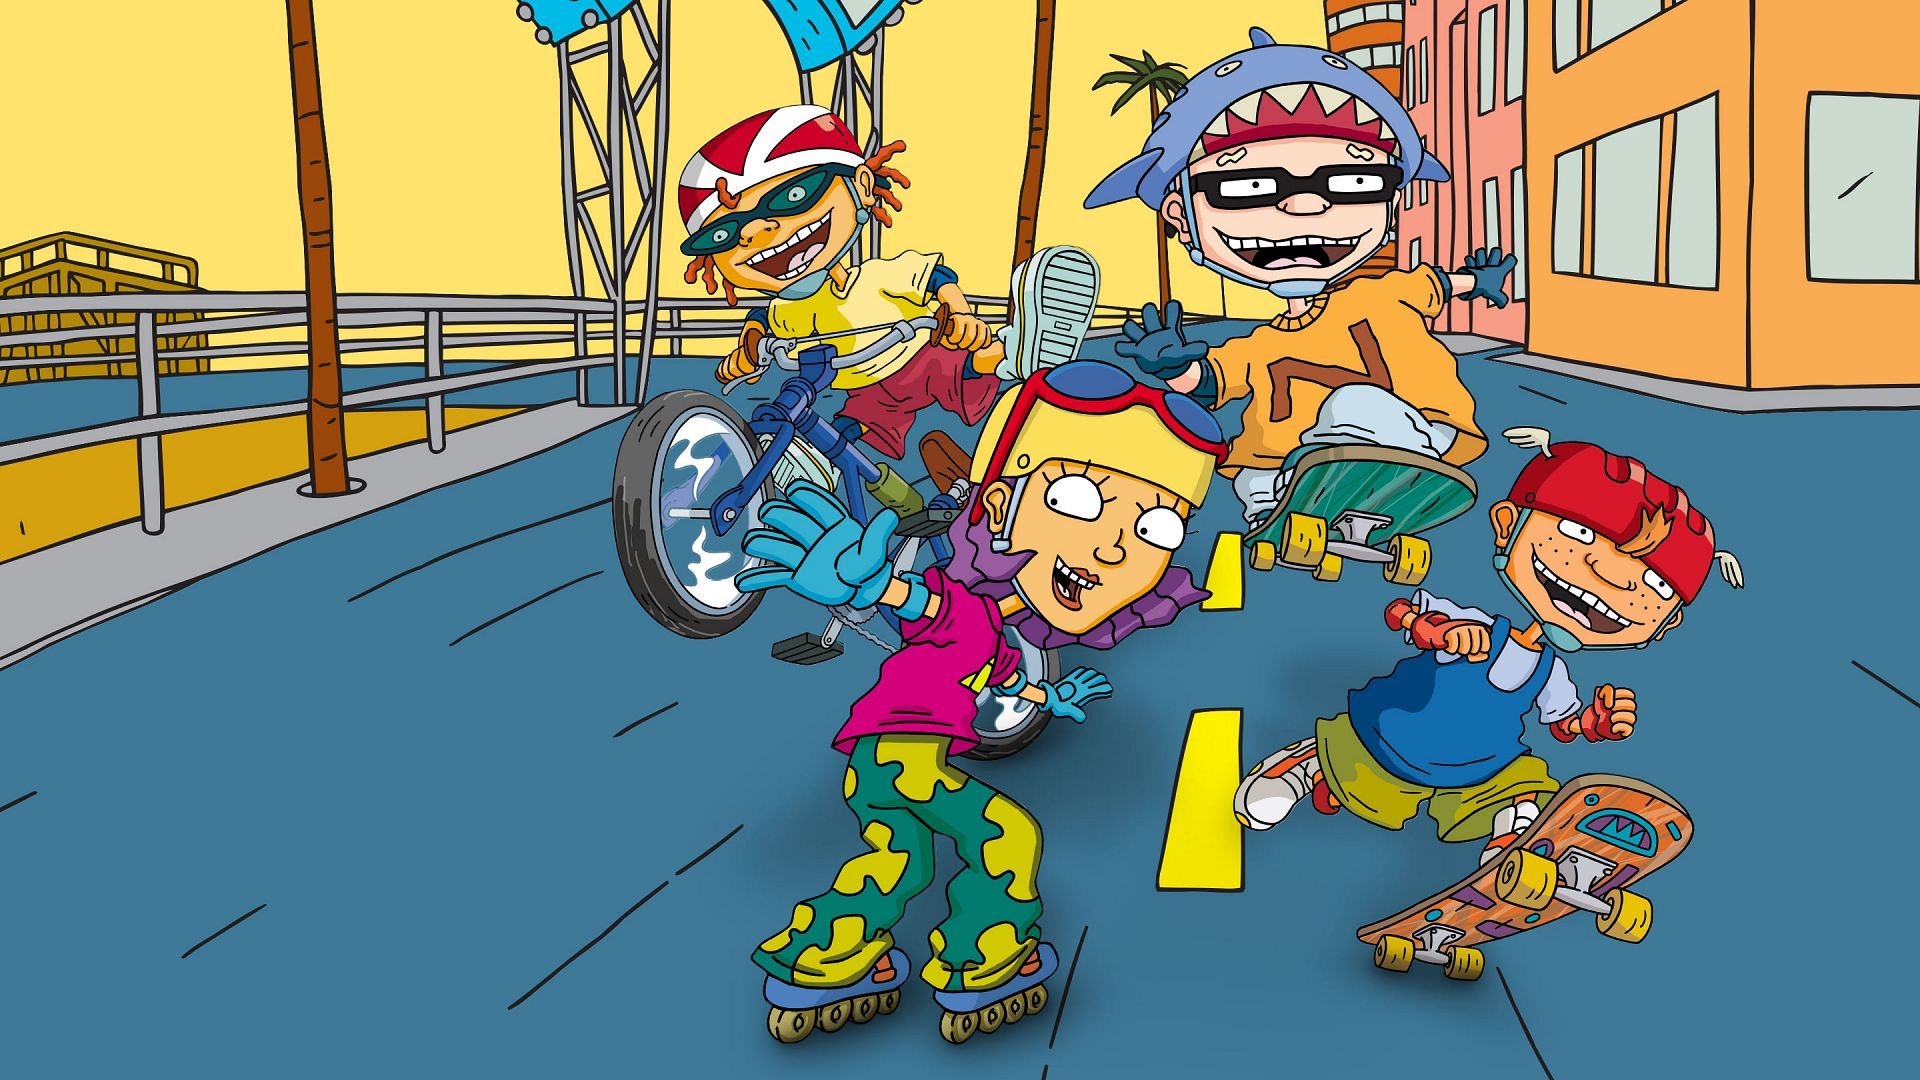 The characters featured in Nickelodeon's cartoon series Rocket Power.